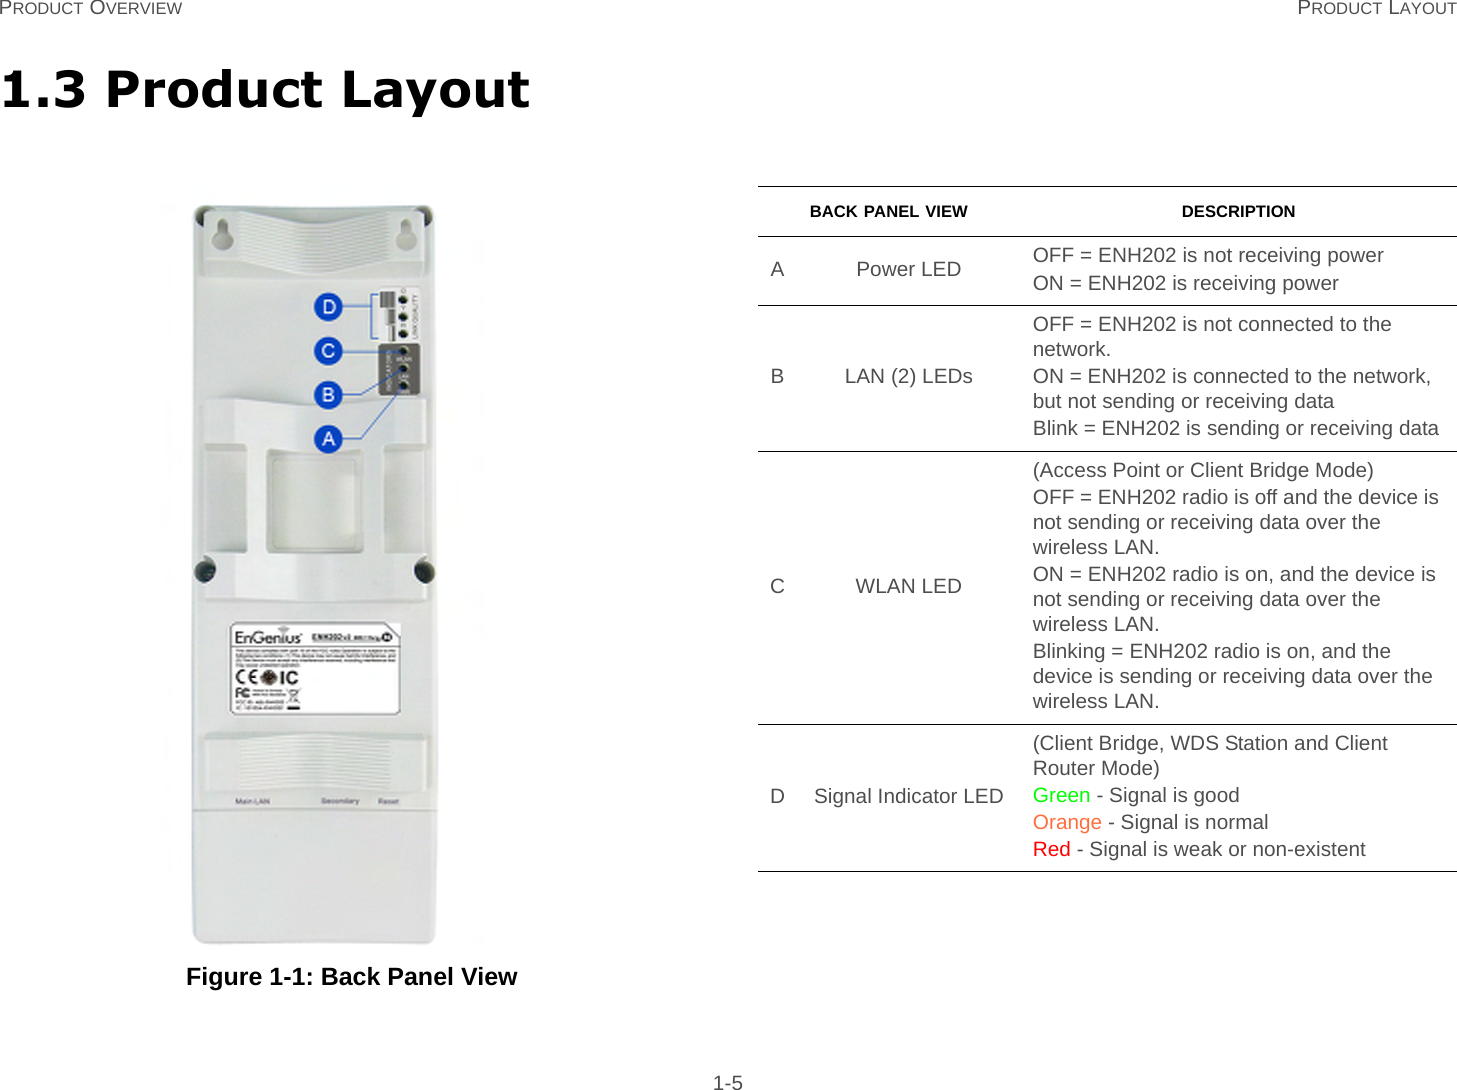 PRODUCT OVERVIEW PRODUCT LAYOUT 1-51.3 Product Layout Figure 1-1: Back Panel ViewBACK PANEL VIEW DESCRIPTIONA Power LED OFF = ENH202 is not receiving powerON = ENH202 is receiving powerB LAN (2) LEDsOFF = ENH202 is not connected to the network.ON = ENH202 is connected to the network, but not sending or receiving dataBlink = ENH202 is sending or receiving dataCWLAN LED(Access Point or Client Bridge Mode)OFF = ENH202 radio is off and the device is not sending or receiving data over the wireless LAN.ON = ENH202 radio is on, and the device is not sending or receiving data over the wireless LAN.Blinking = ENH202 radio is on, and the device is sending or receiving data over the wireless LAN.D Signal Indicator LED(Client Bridge, WDS Station and Client Router Mode)Green - Signal is goodOrange - Signal is normalRed - Signal is weak or non-existent